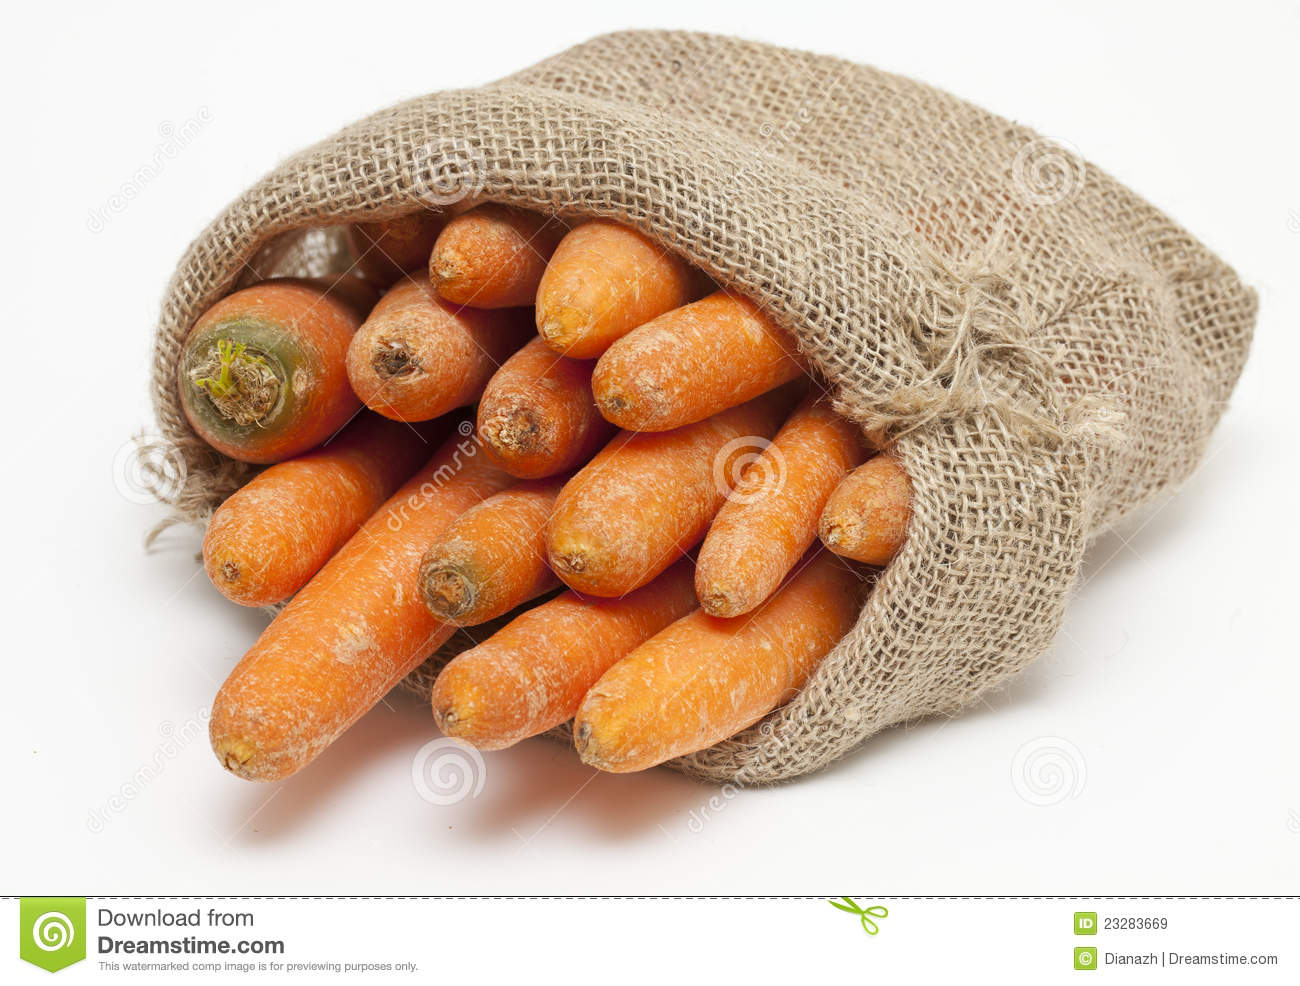 Carrots In A Burlap Bag Royalty Free Stock Images   Image  23283669